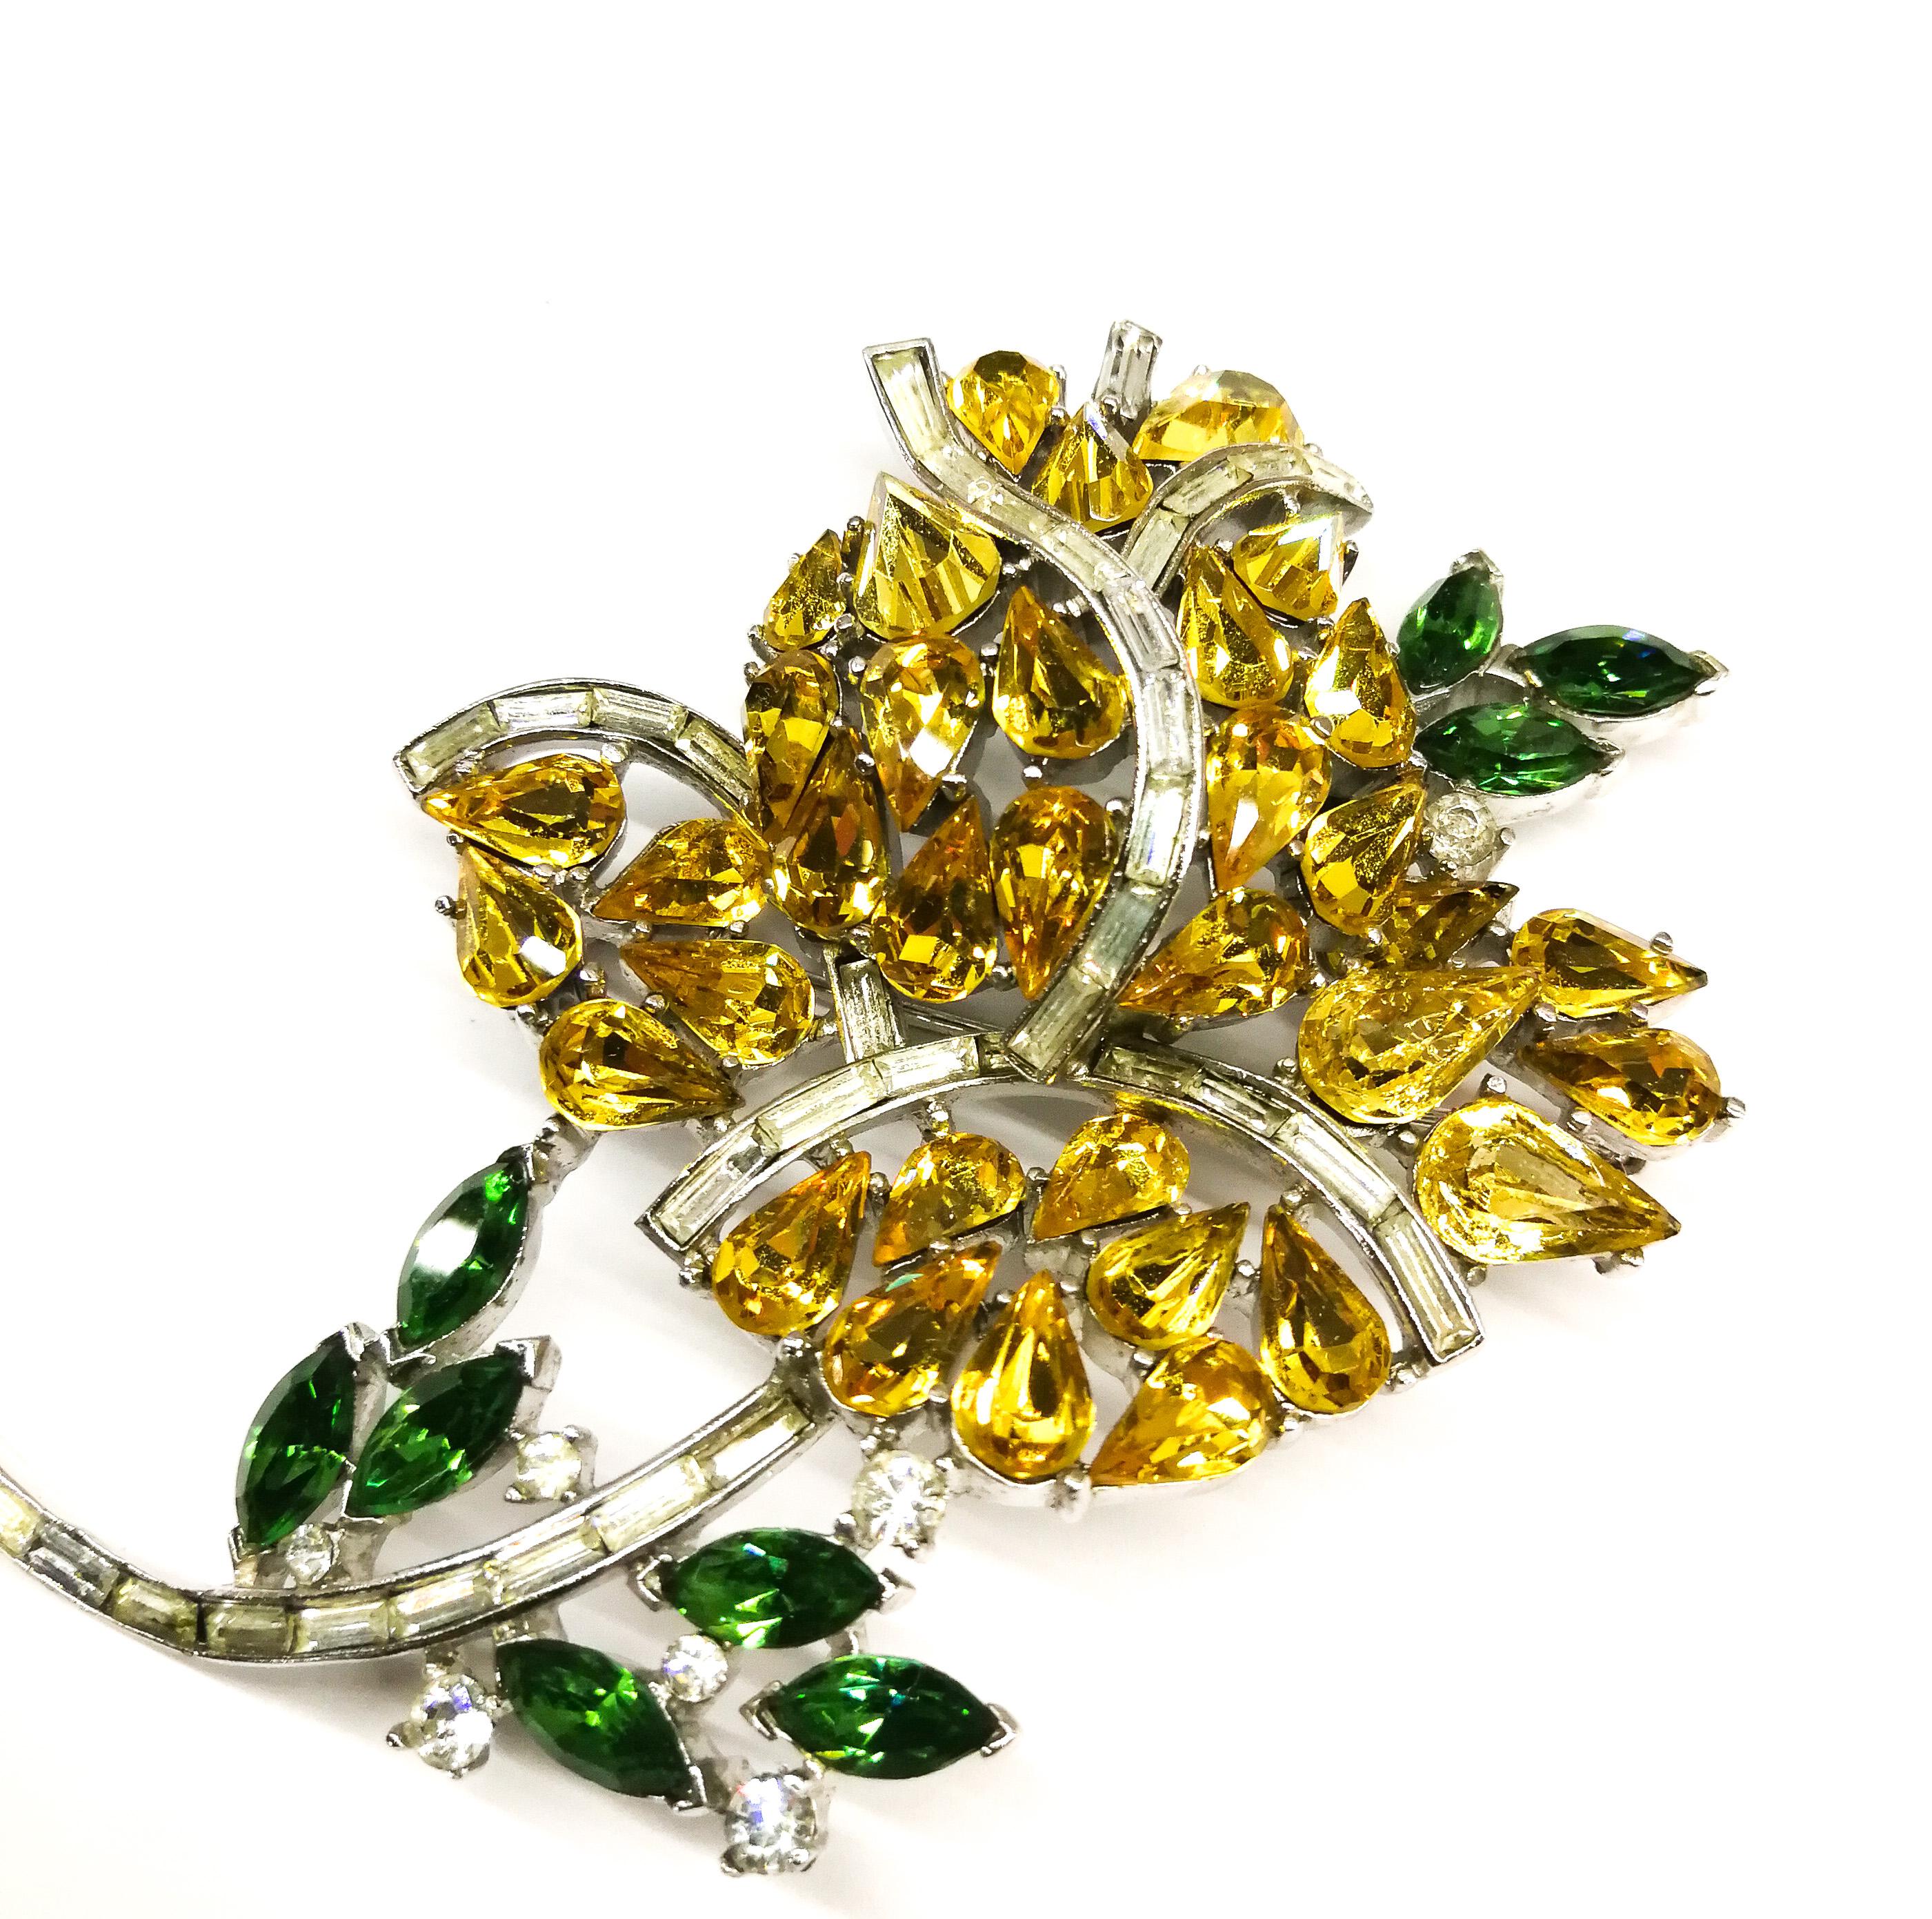 An exceptional and rare brooch, in the form of a flowering rose, by Alfred Philippe for Trifari. Hand set stones of citrine and emerald navette pastes, are delineated and highlighted by rows of clear paste baguettes, creating a very three